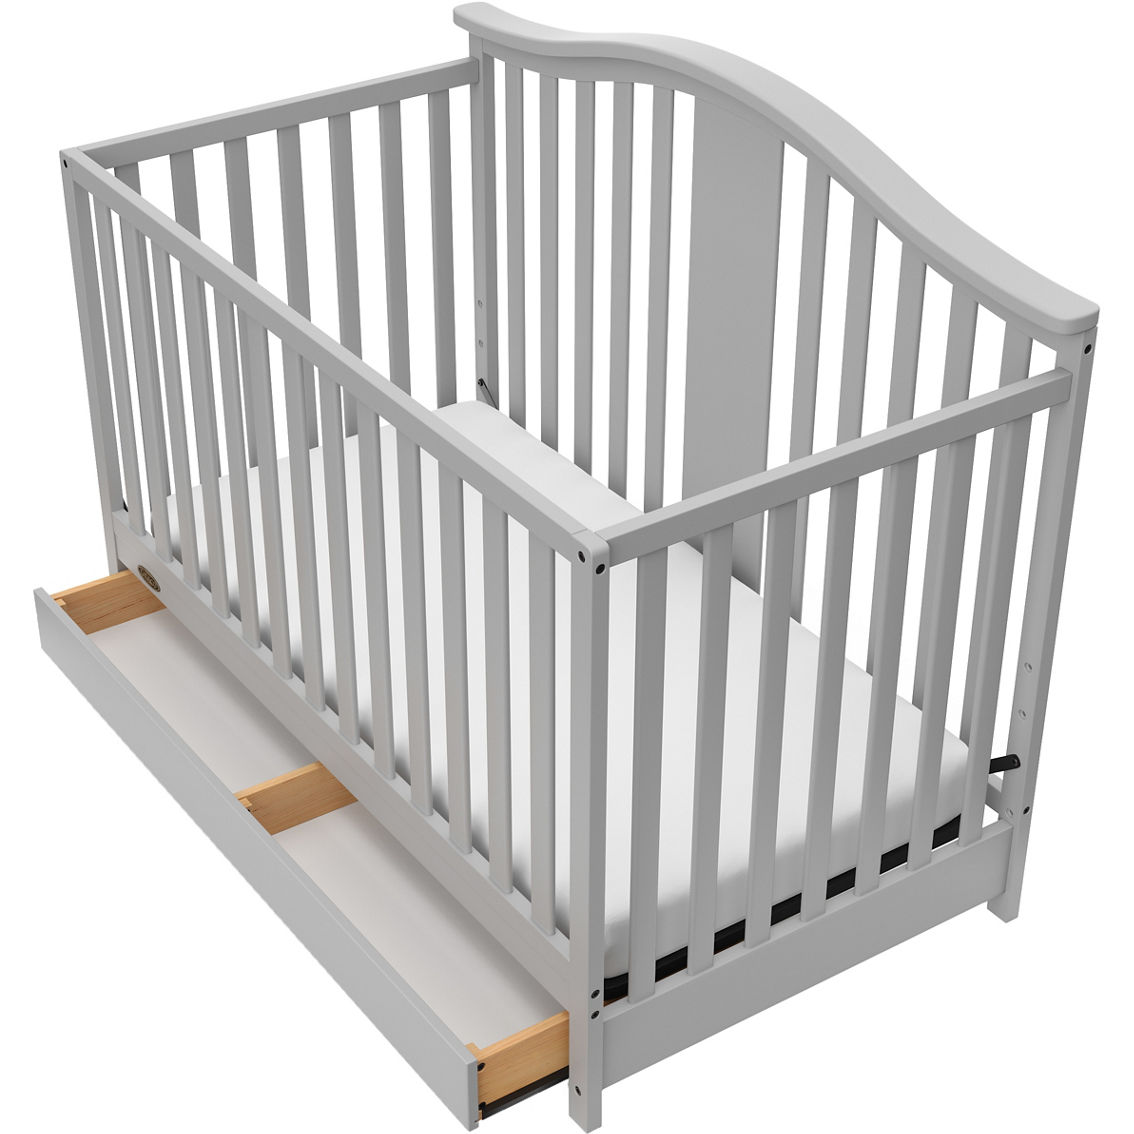 Graco Solano 4-in-1 Convertible Crib with Drawer - Image 4 of 5